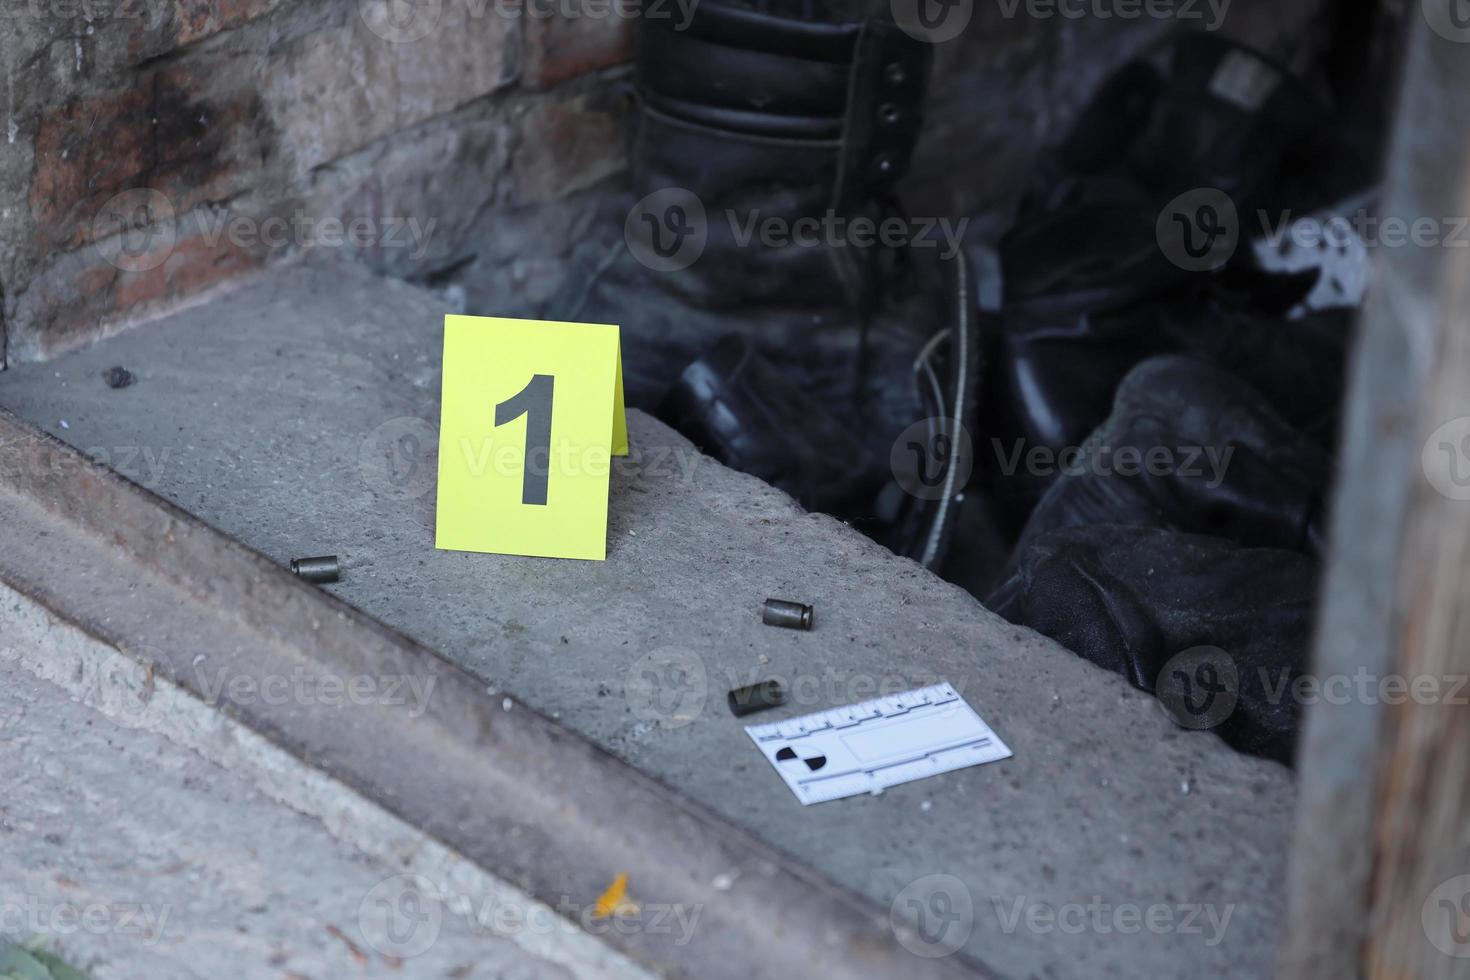 Evidence with yellow CSI marker for evidence numbering on the residental backyard in evening. Crime scene investigation concept photo